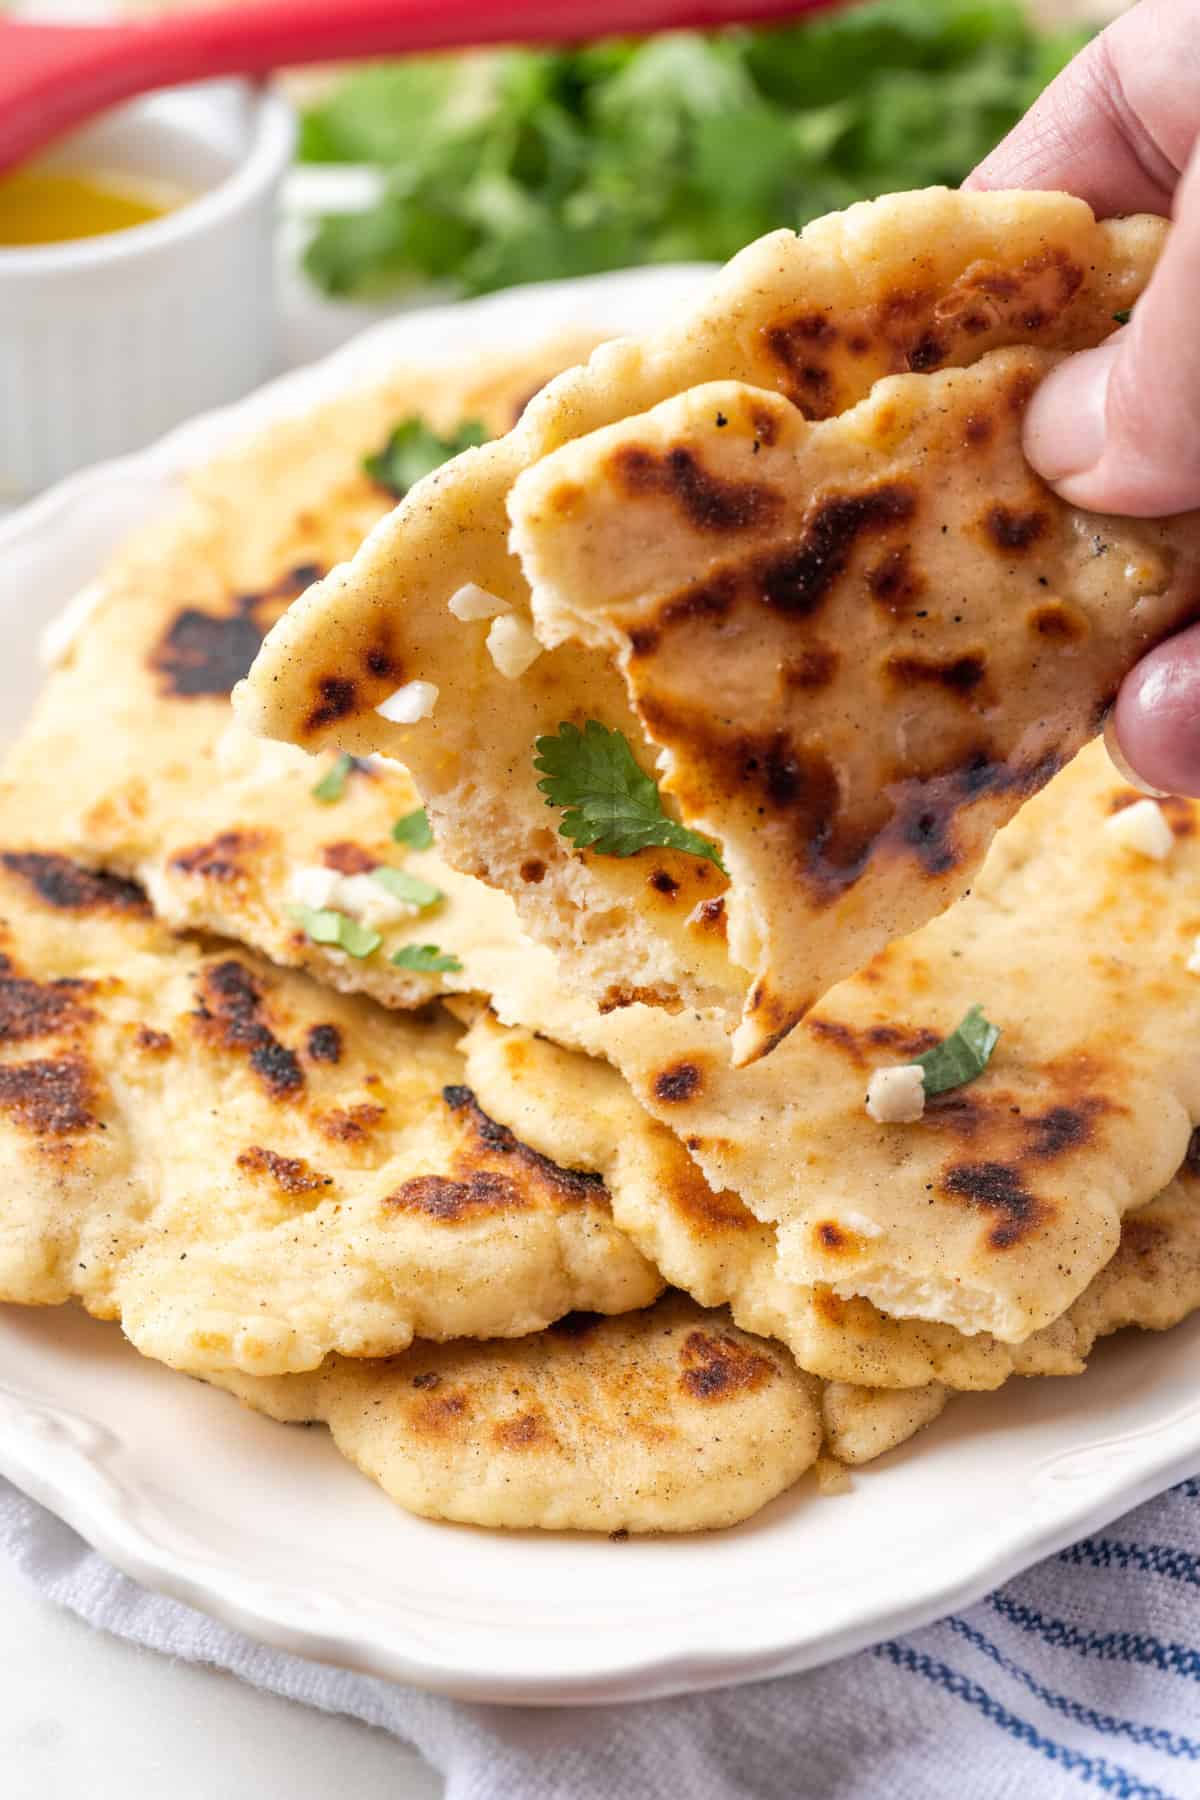 A hand lifts a piece of gluten-free naan with more naan in the background.